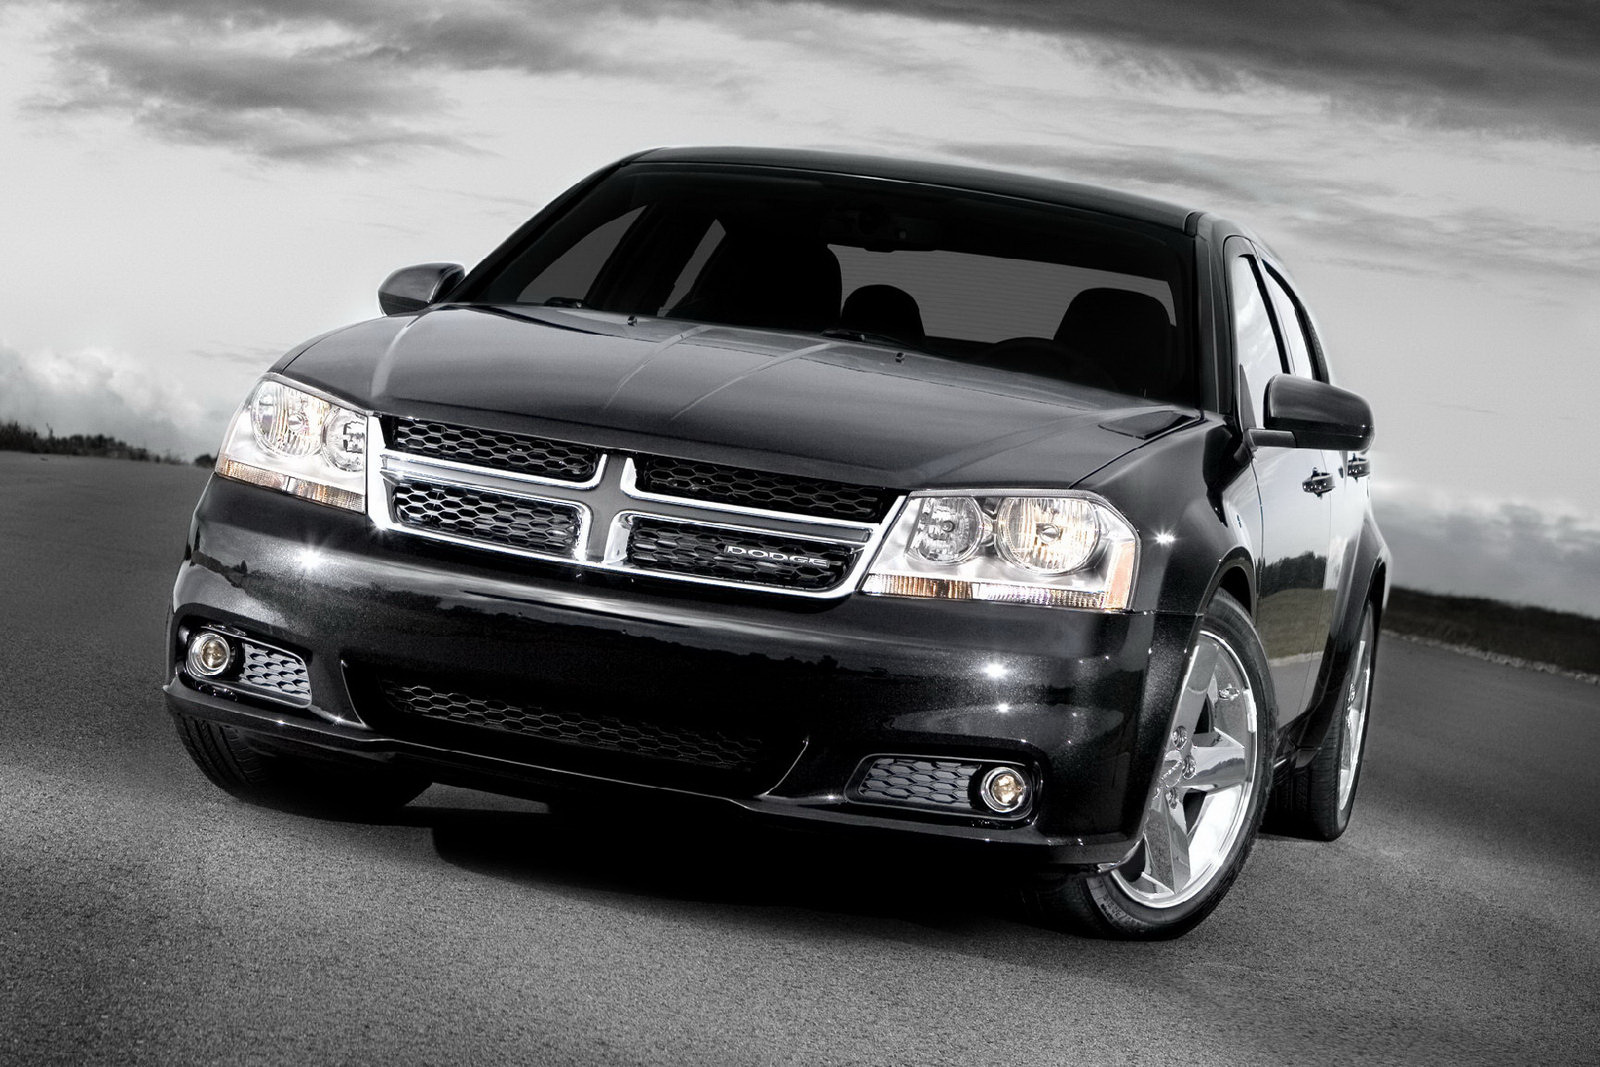 2011 Dodge Avenger Officially Revealed, gets New Interior and 283HP V6 |  Carscoops